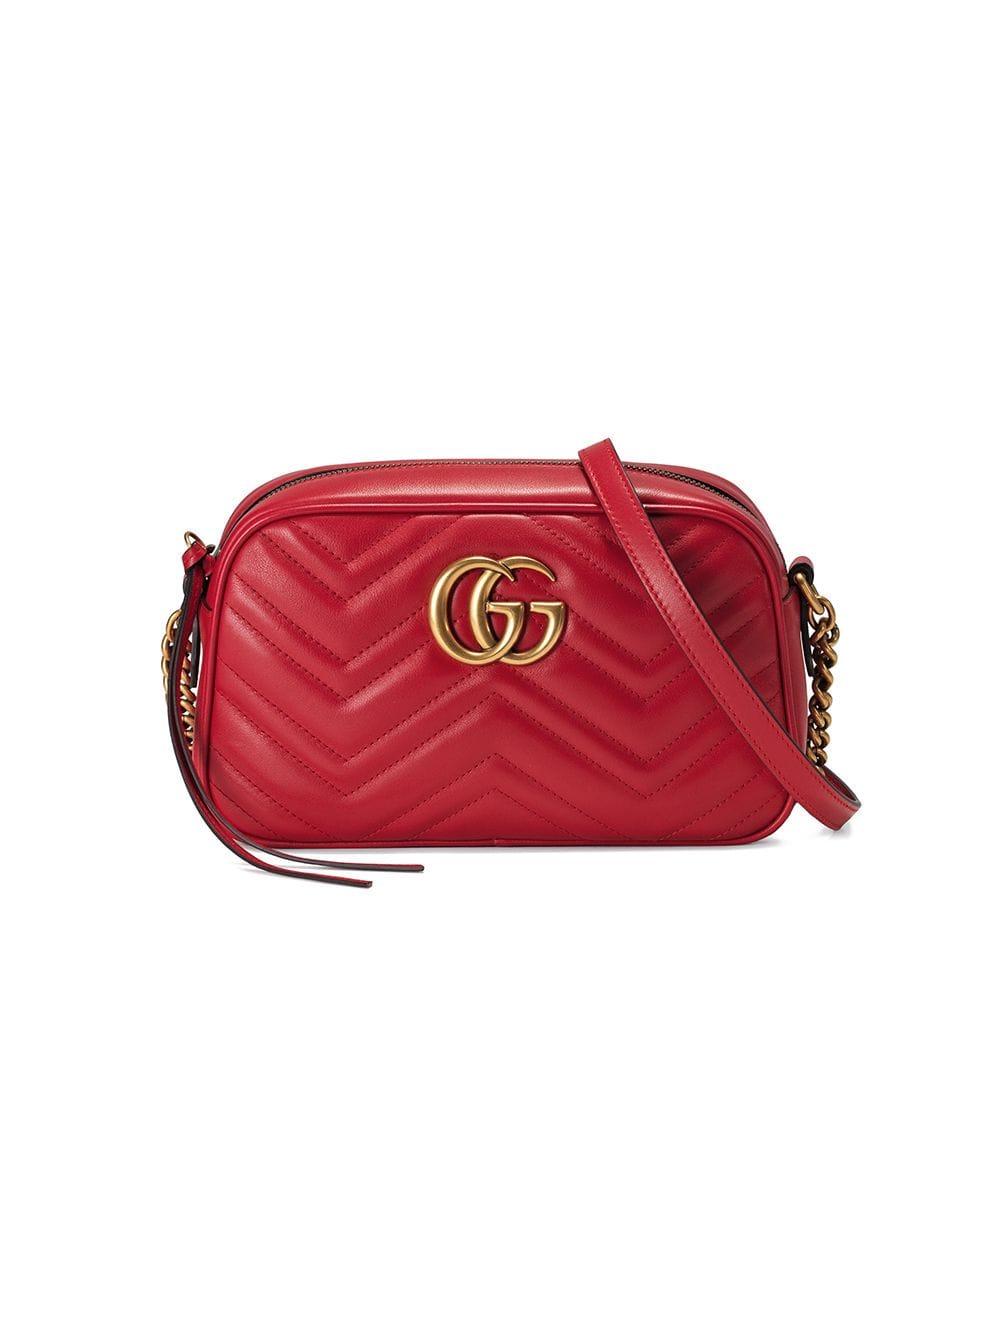 Gucci Marmont Small Matelassé Leather Shoulder Bag in Red - Lyst